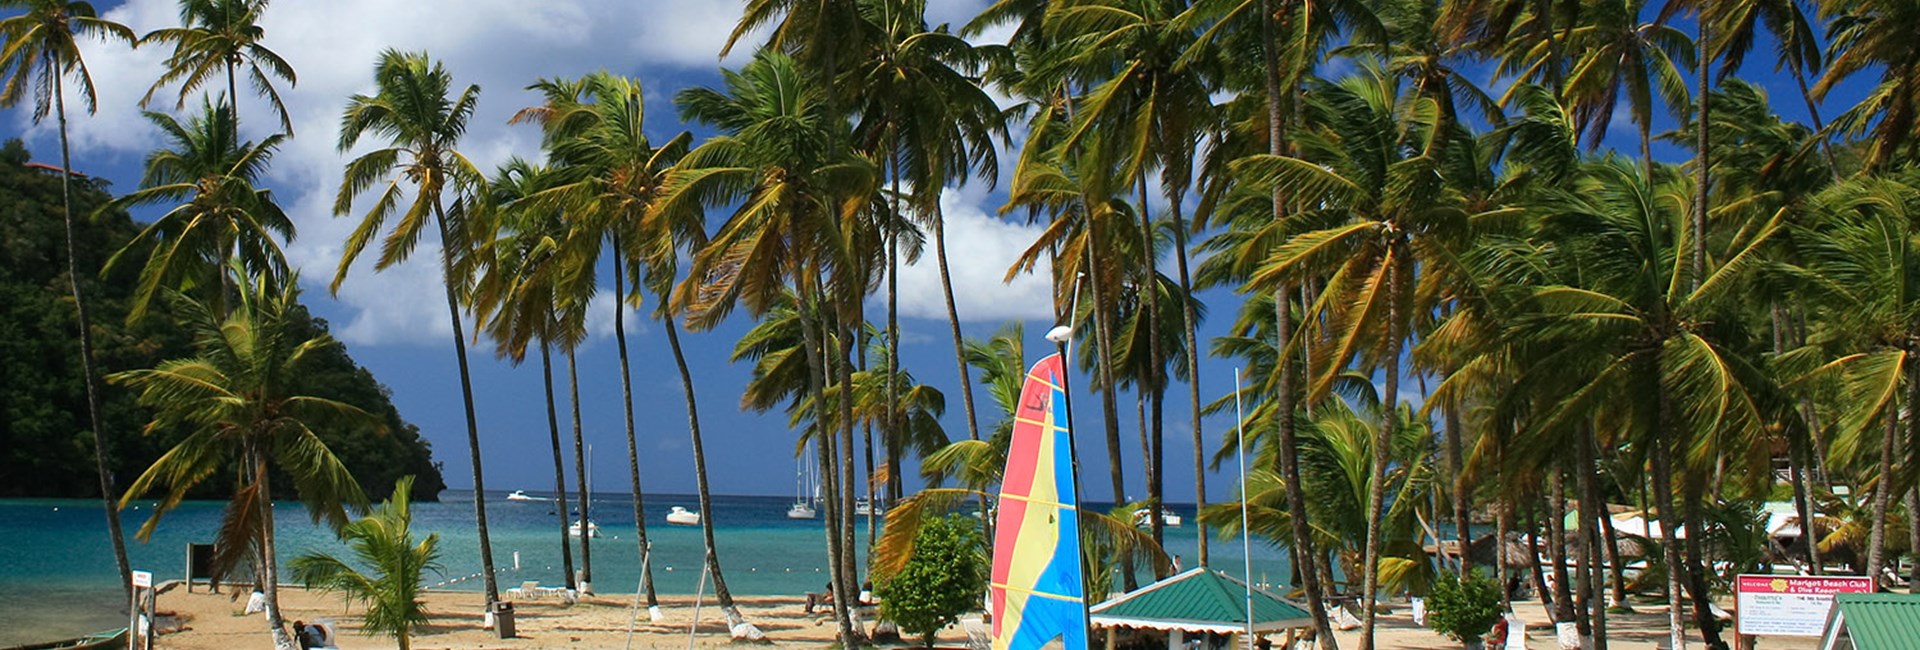 Boats and kayaks lined up on a tropical beach with tall palm trees